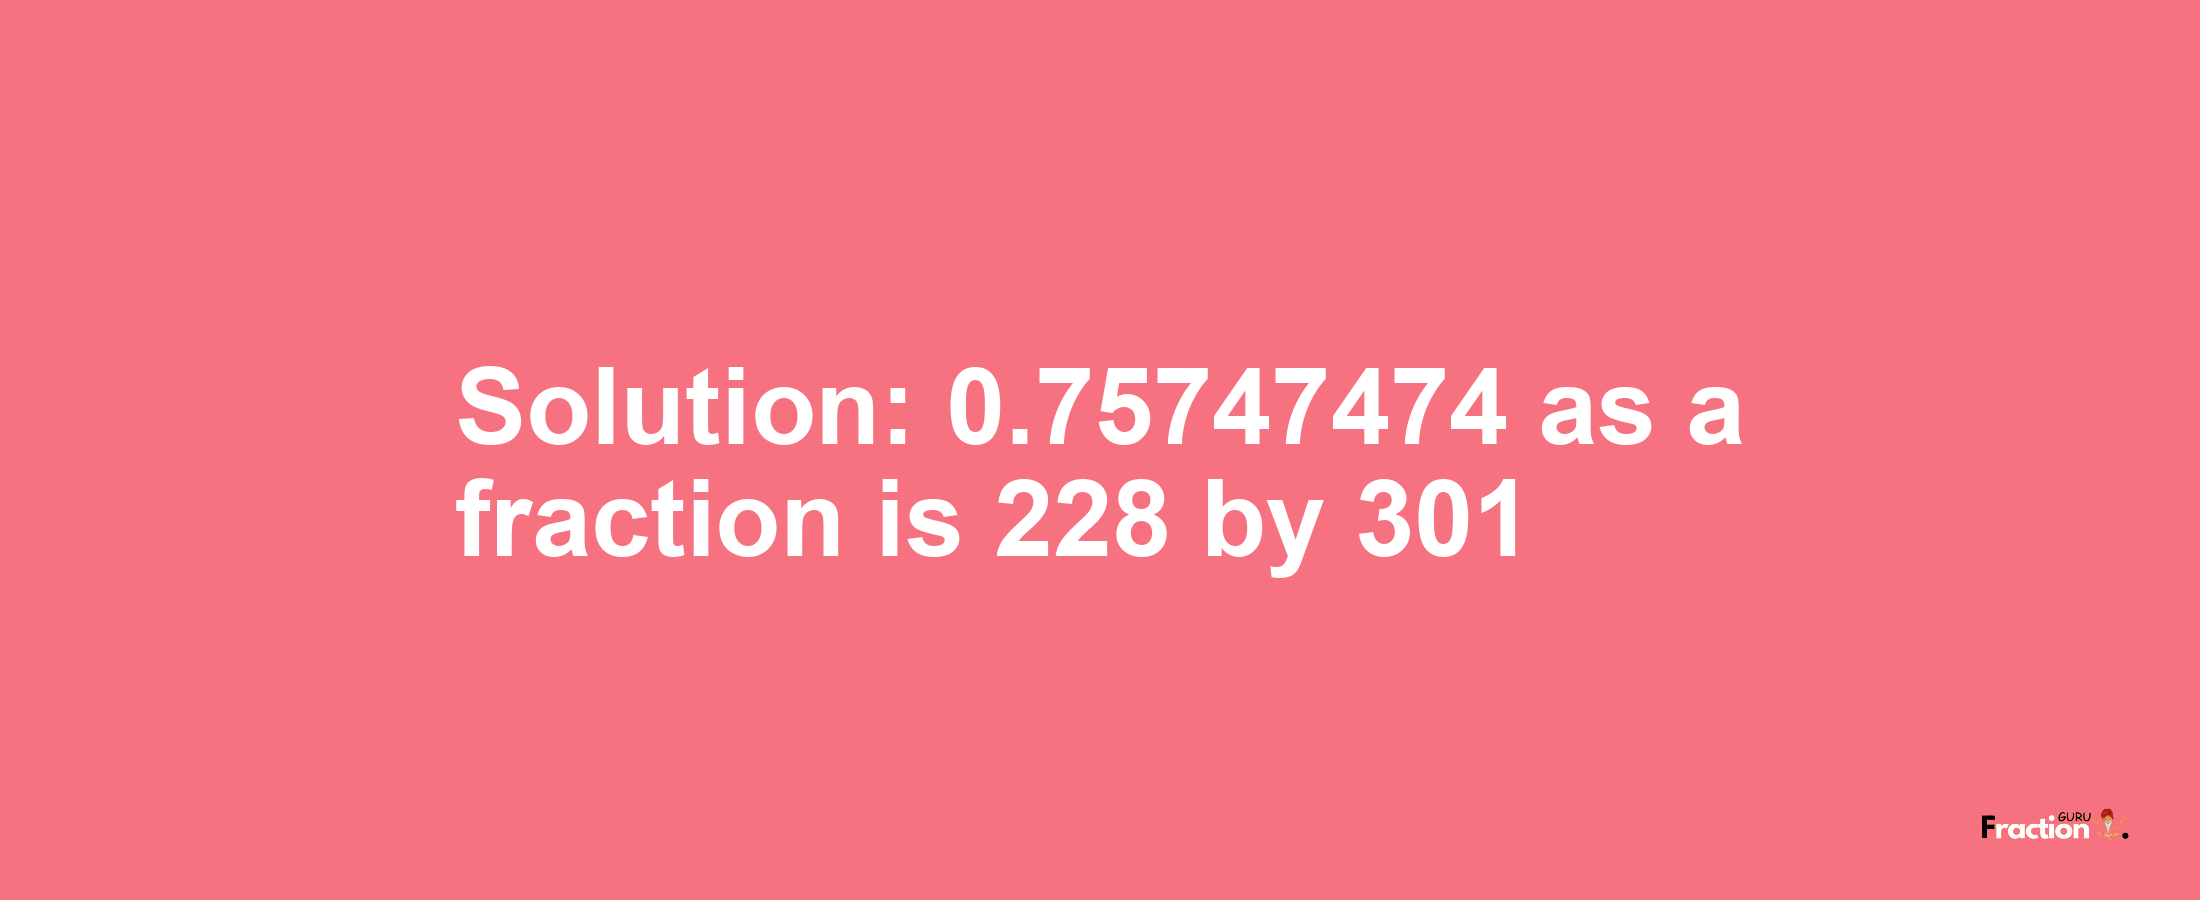 Solution:0.75747474 as a fraction is 228/301